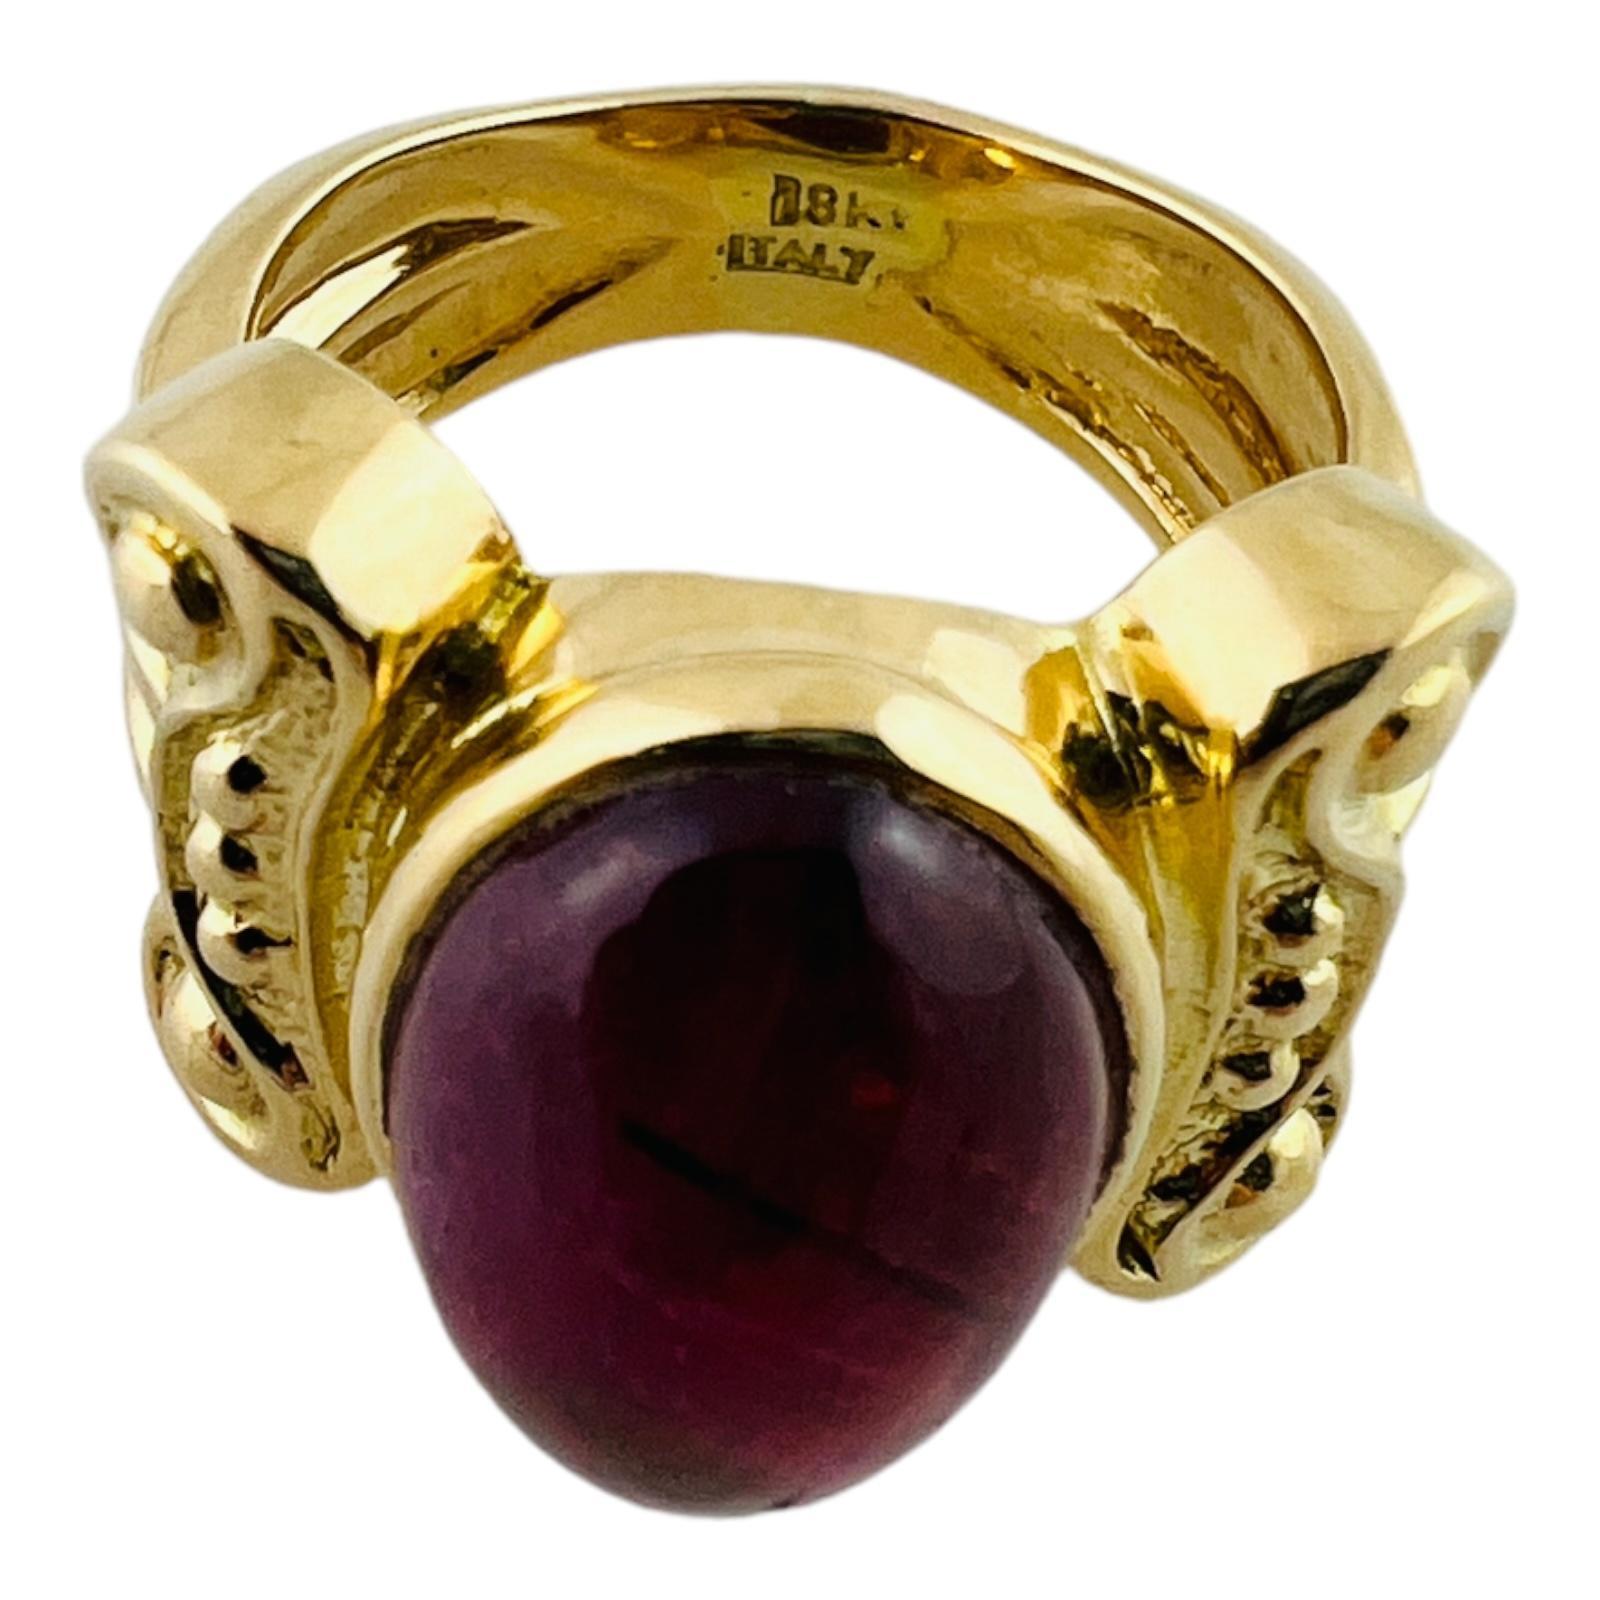 Vintage 18K Yellow Gold Pink Tourmaline Cabochon Statement Ring Size 5.5

This gorgeous statement piece is meticulously crafted from 18K yellow gold features a stunning oval cabochon pink tourmaline stone in the center for a beautiful